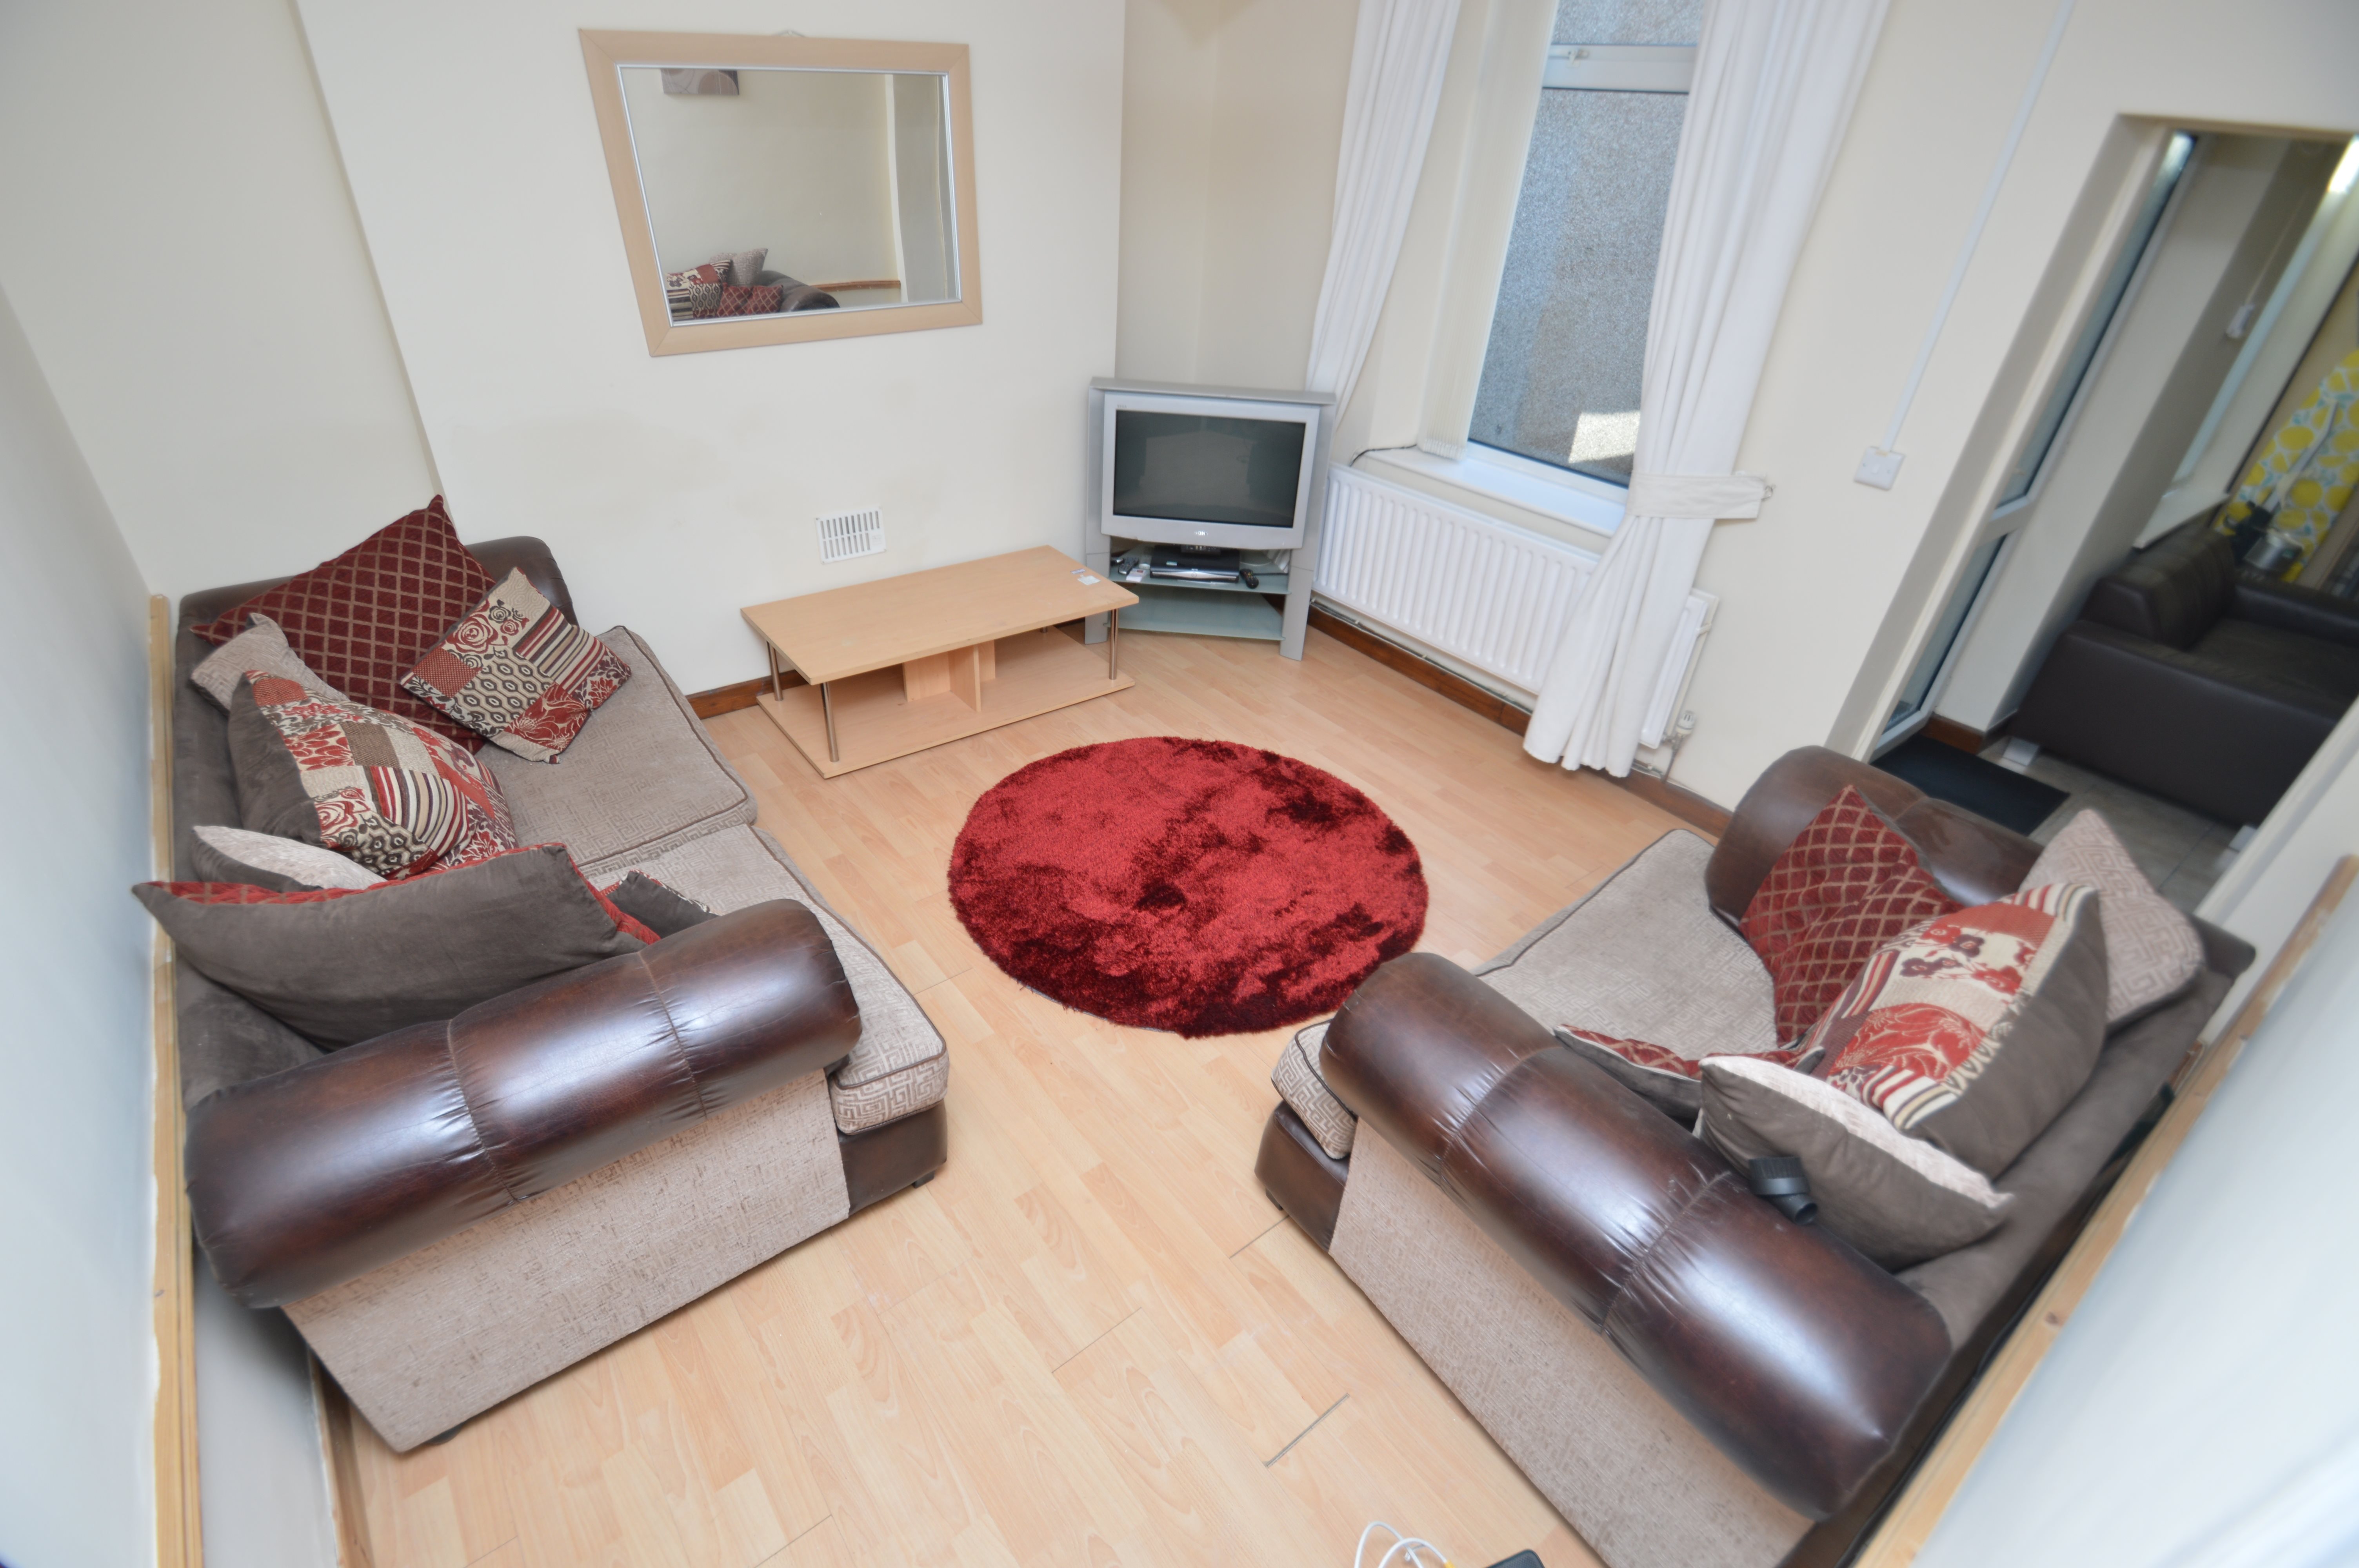 1 bed house / flat share to rent in Wood Road , Treforest  2